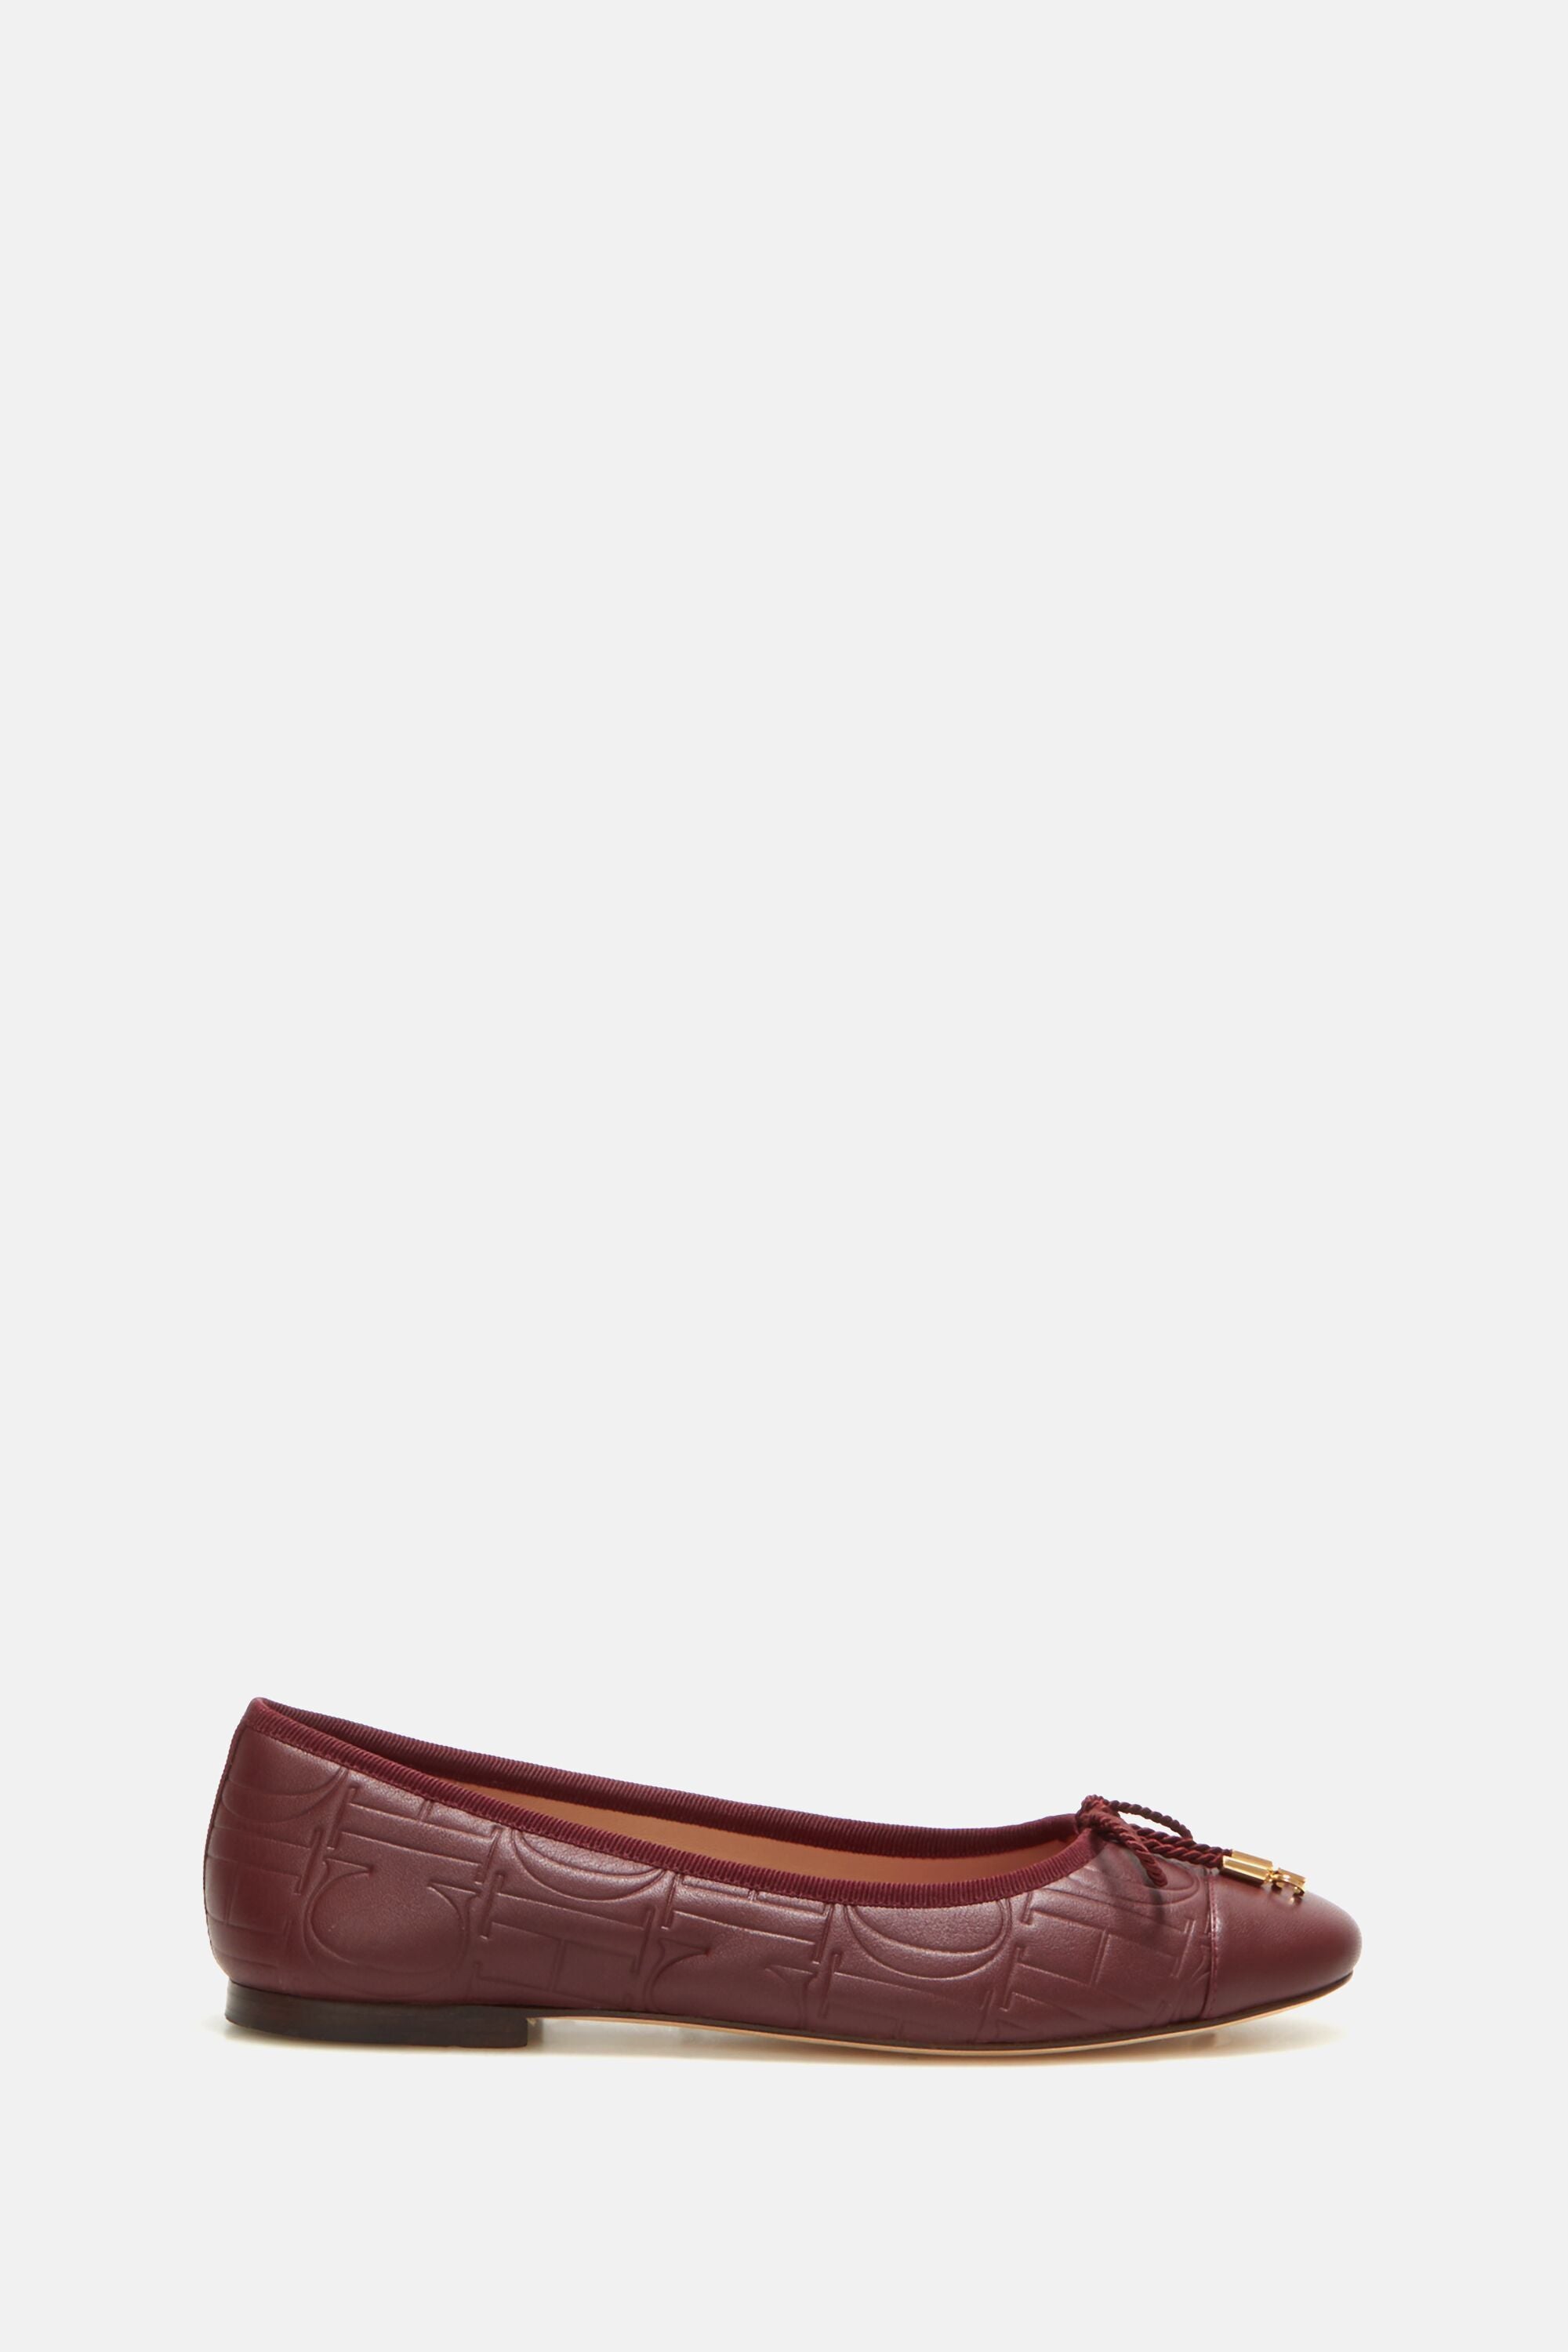 CH leather ballet flats